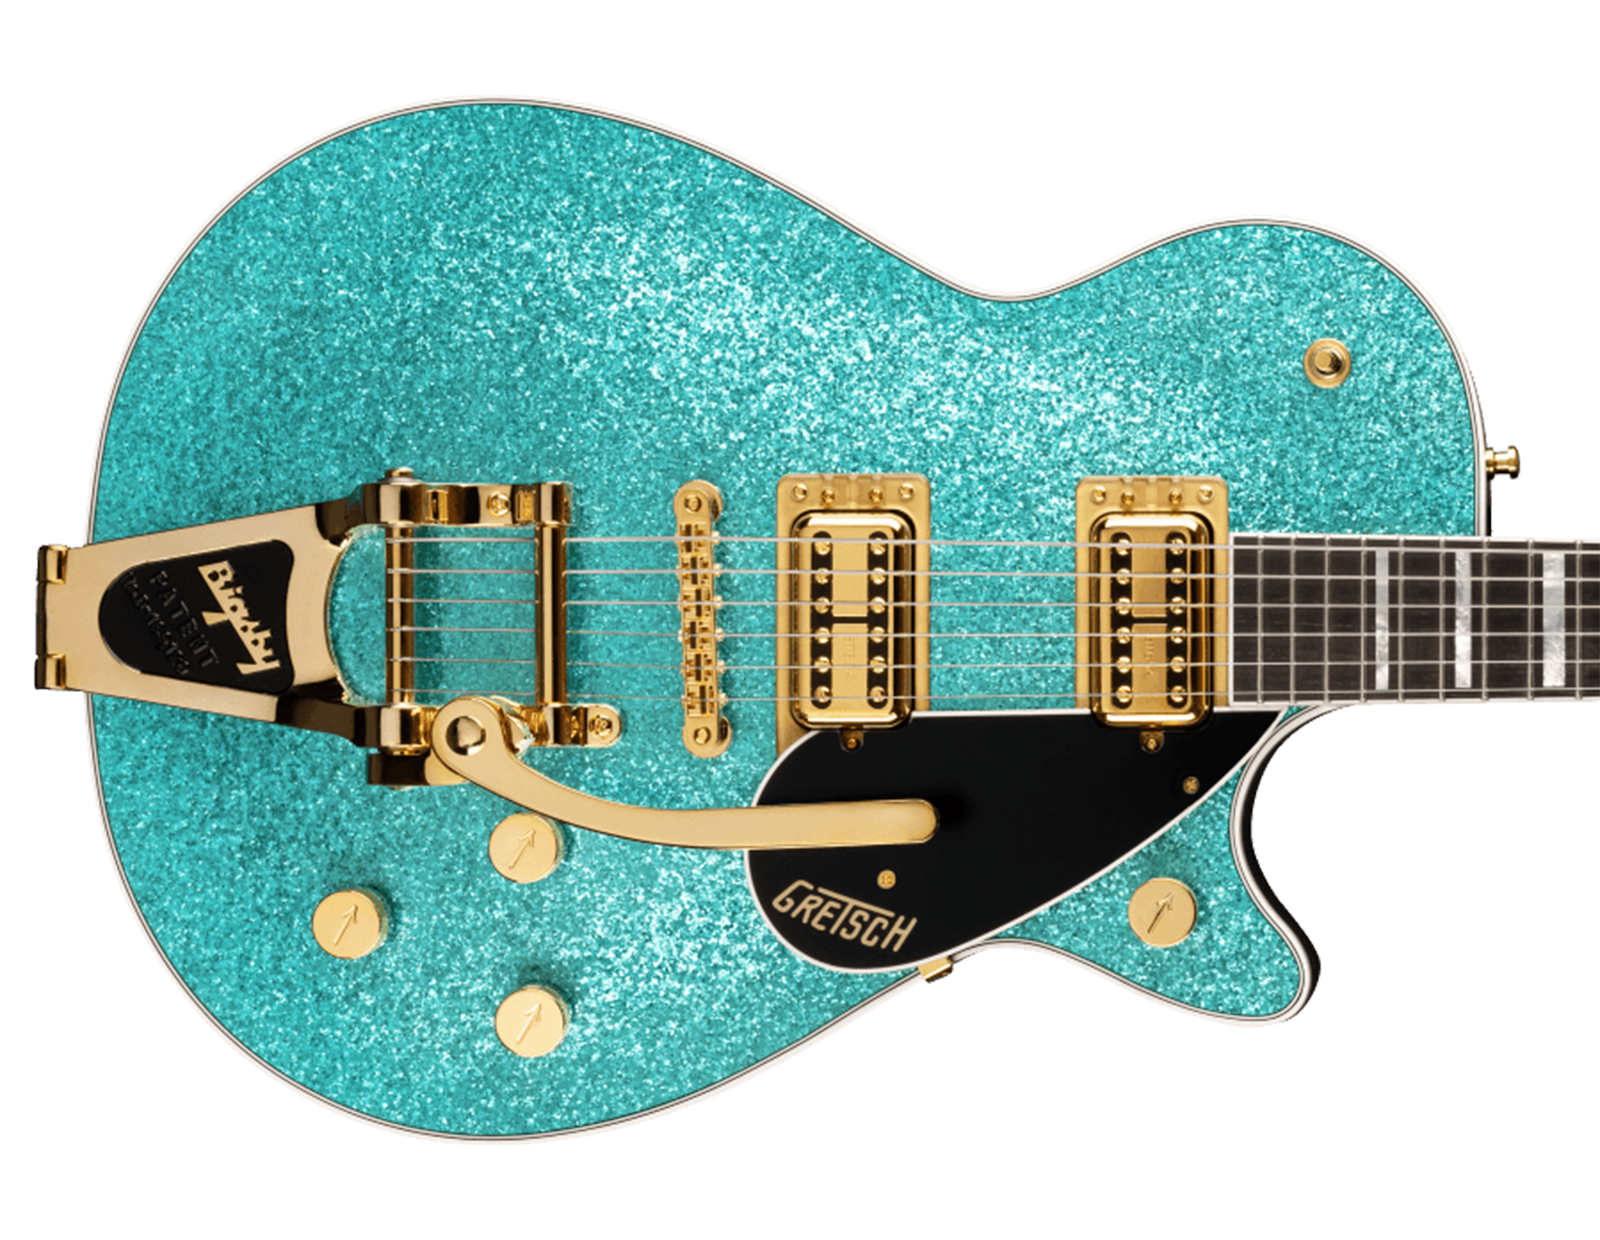 Explore The New Features For Gretsch 2022 | guitarguitar